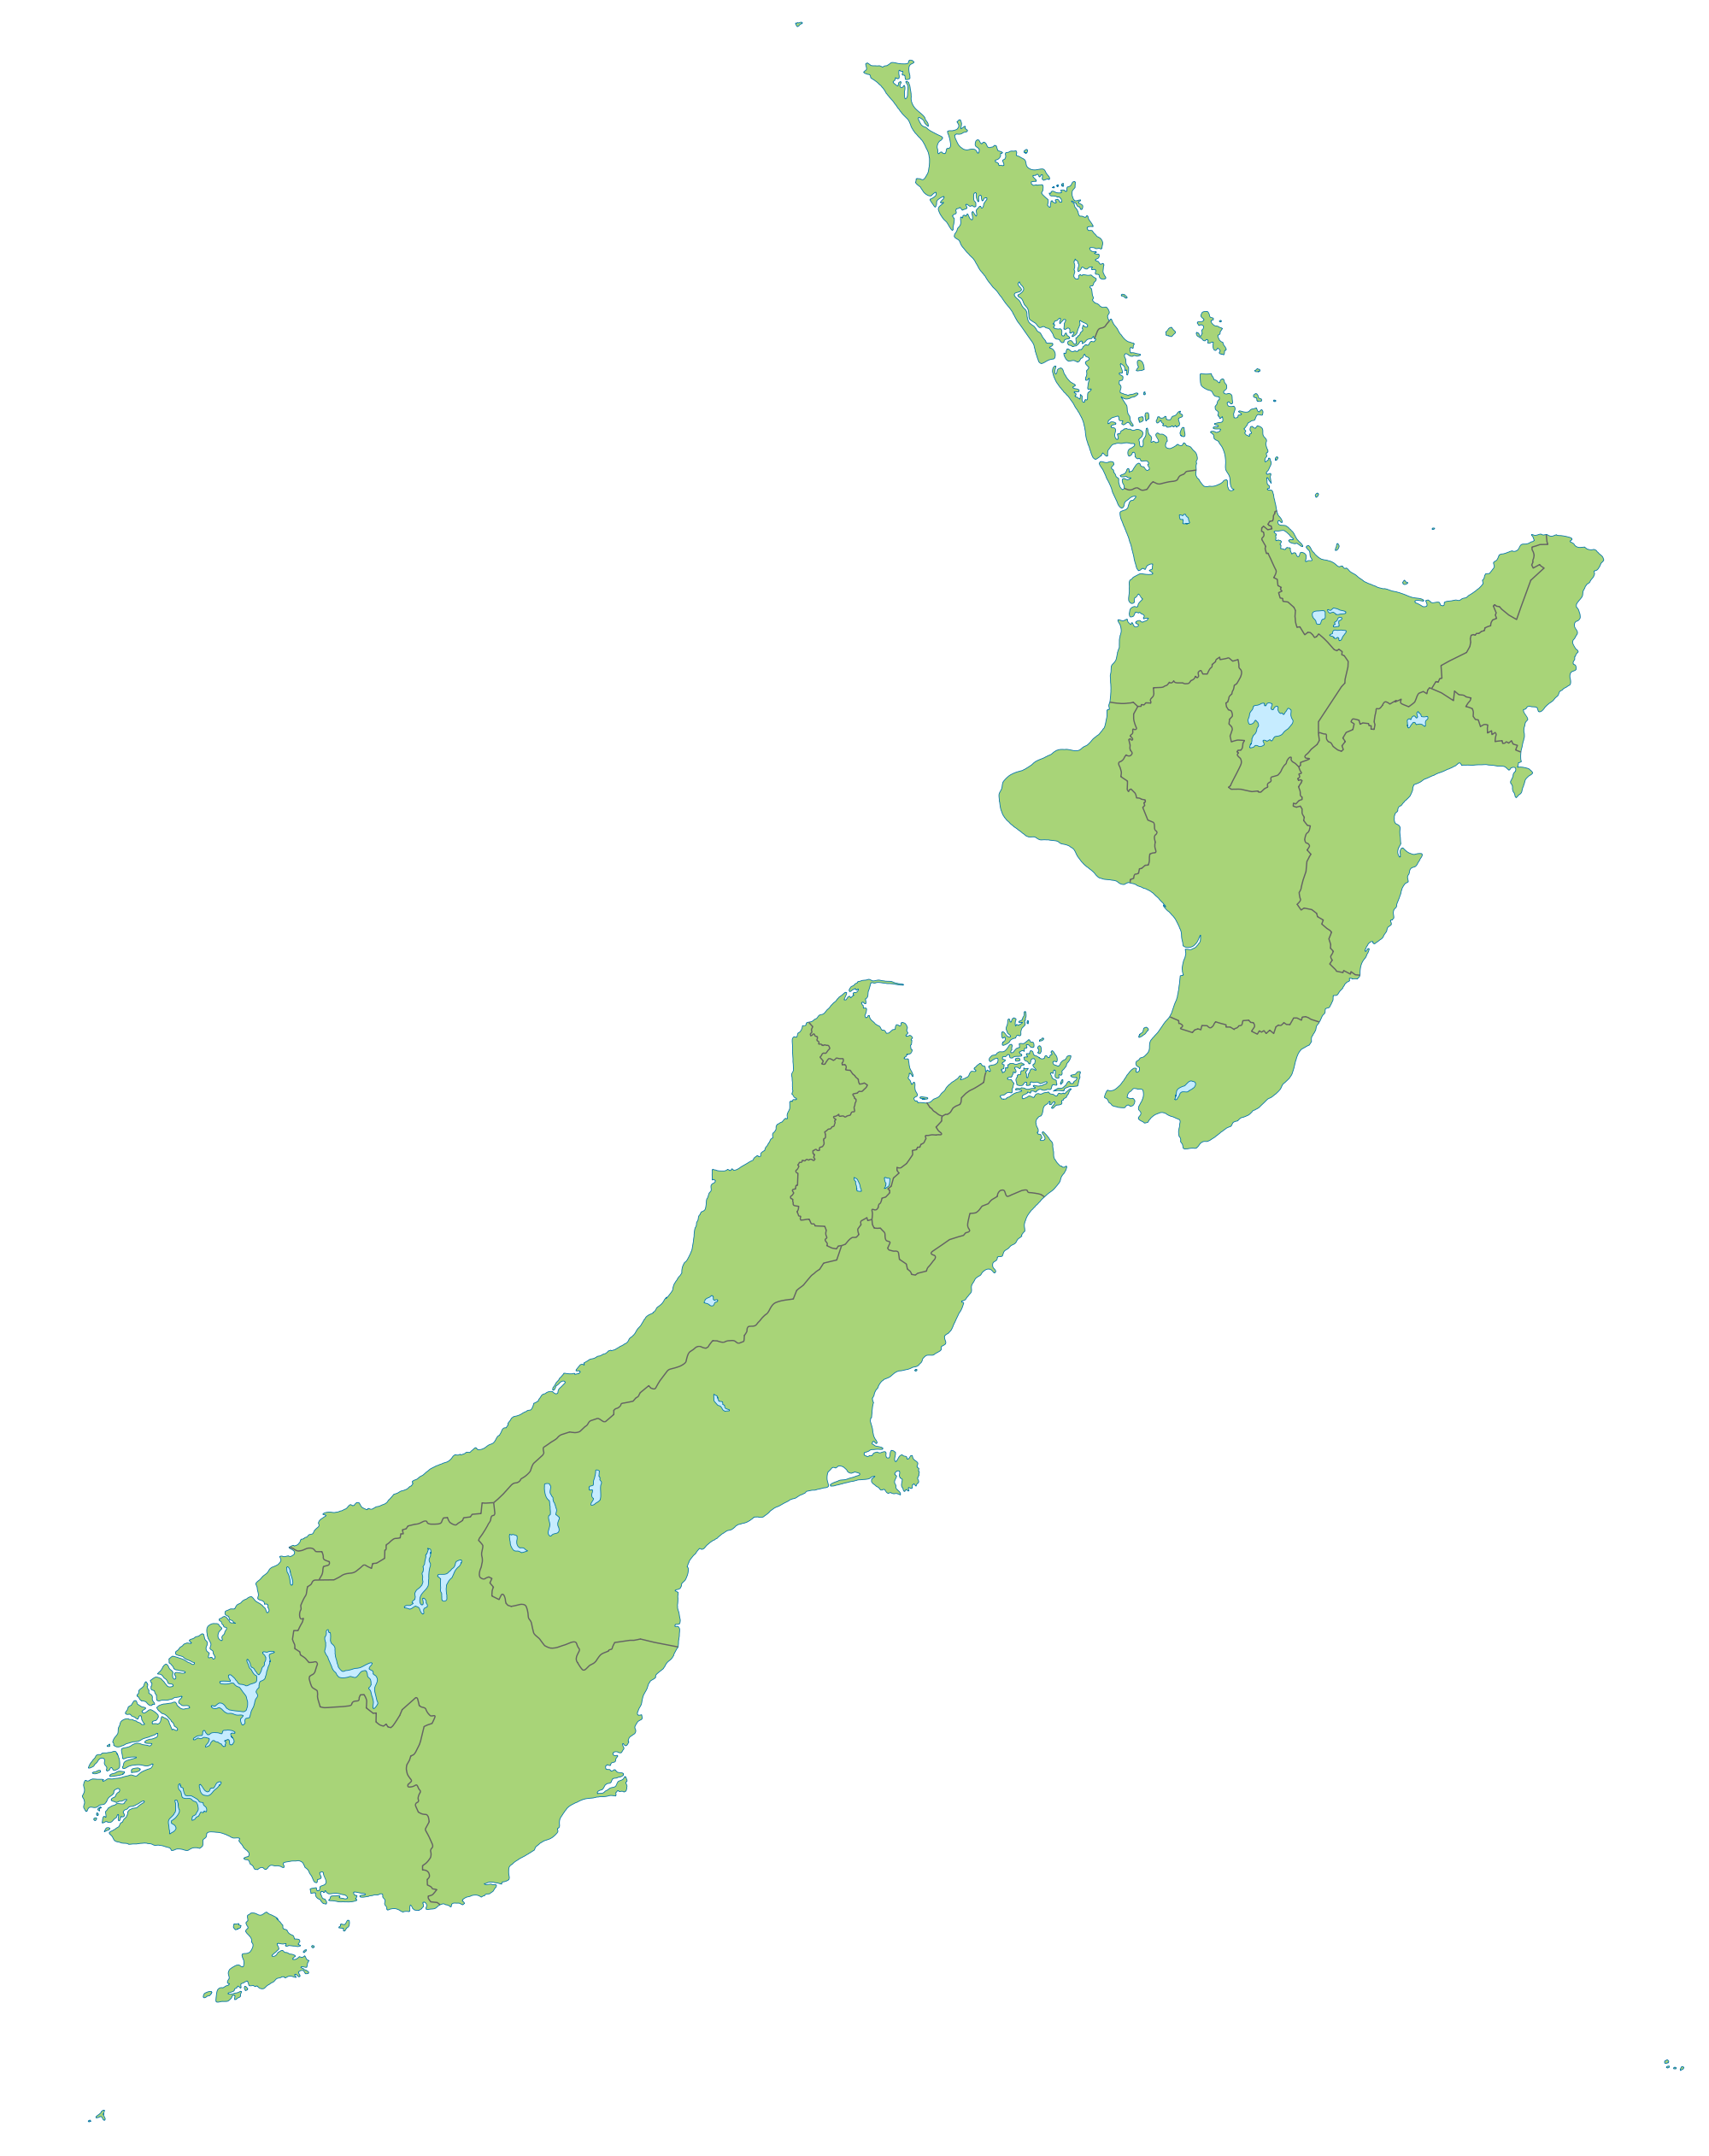 free-photo-new-zealand-map-atlas-auckland-cities-free-download